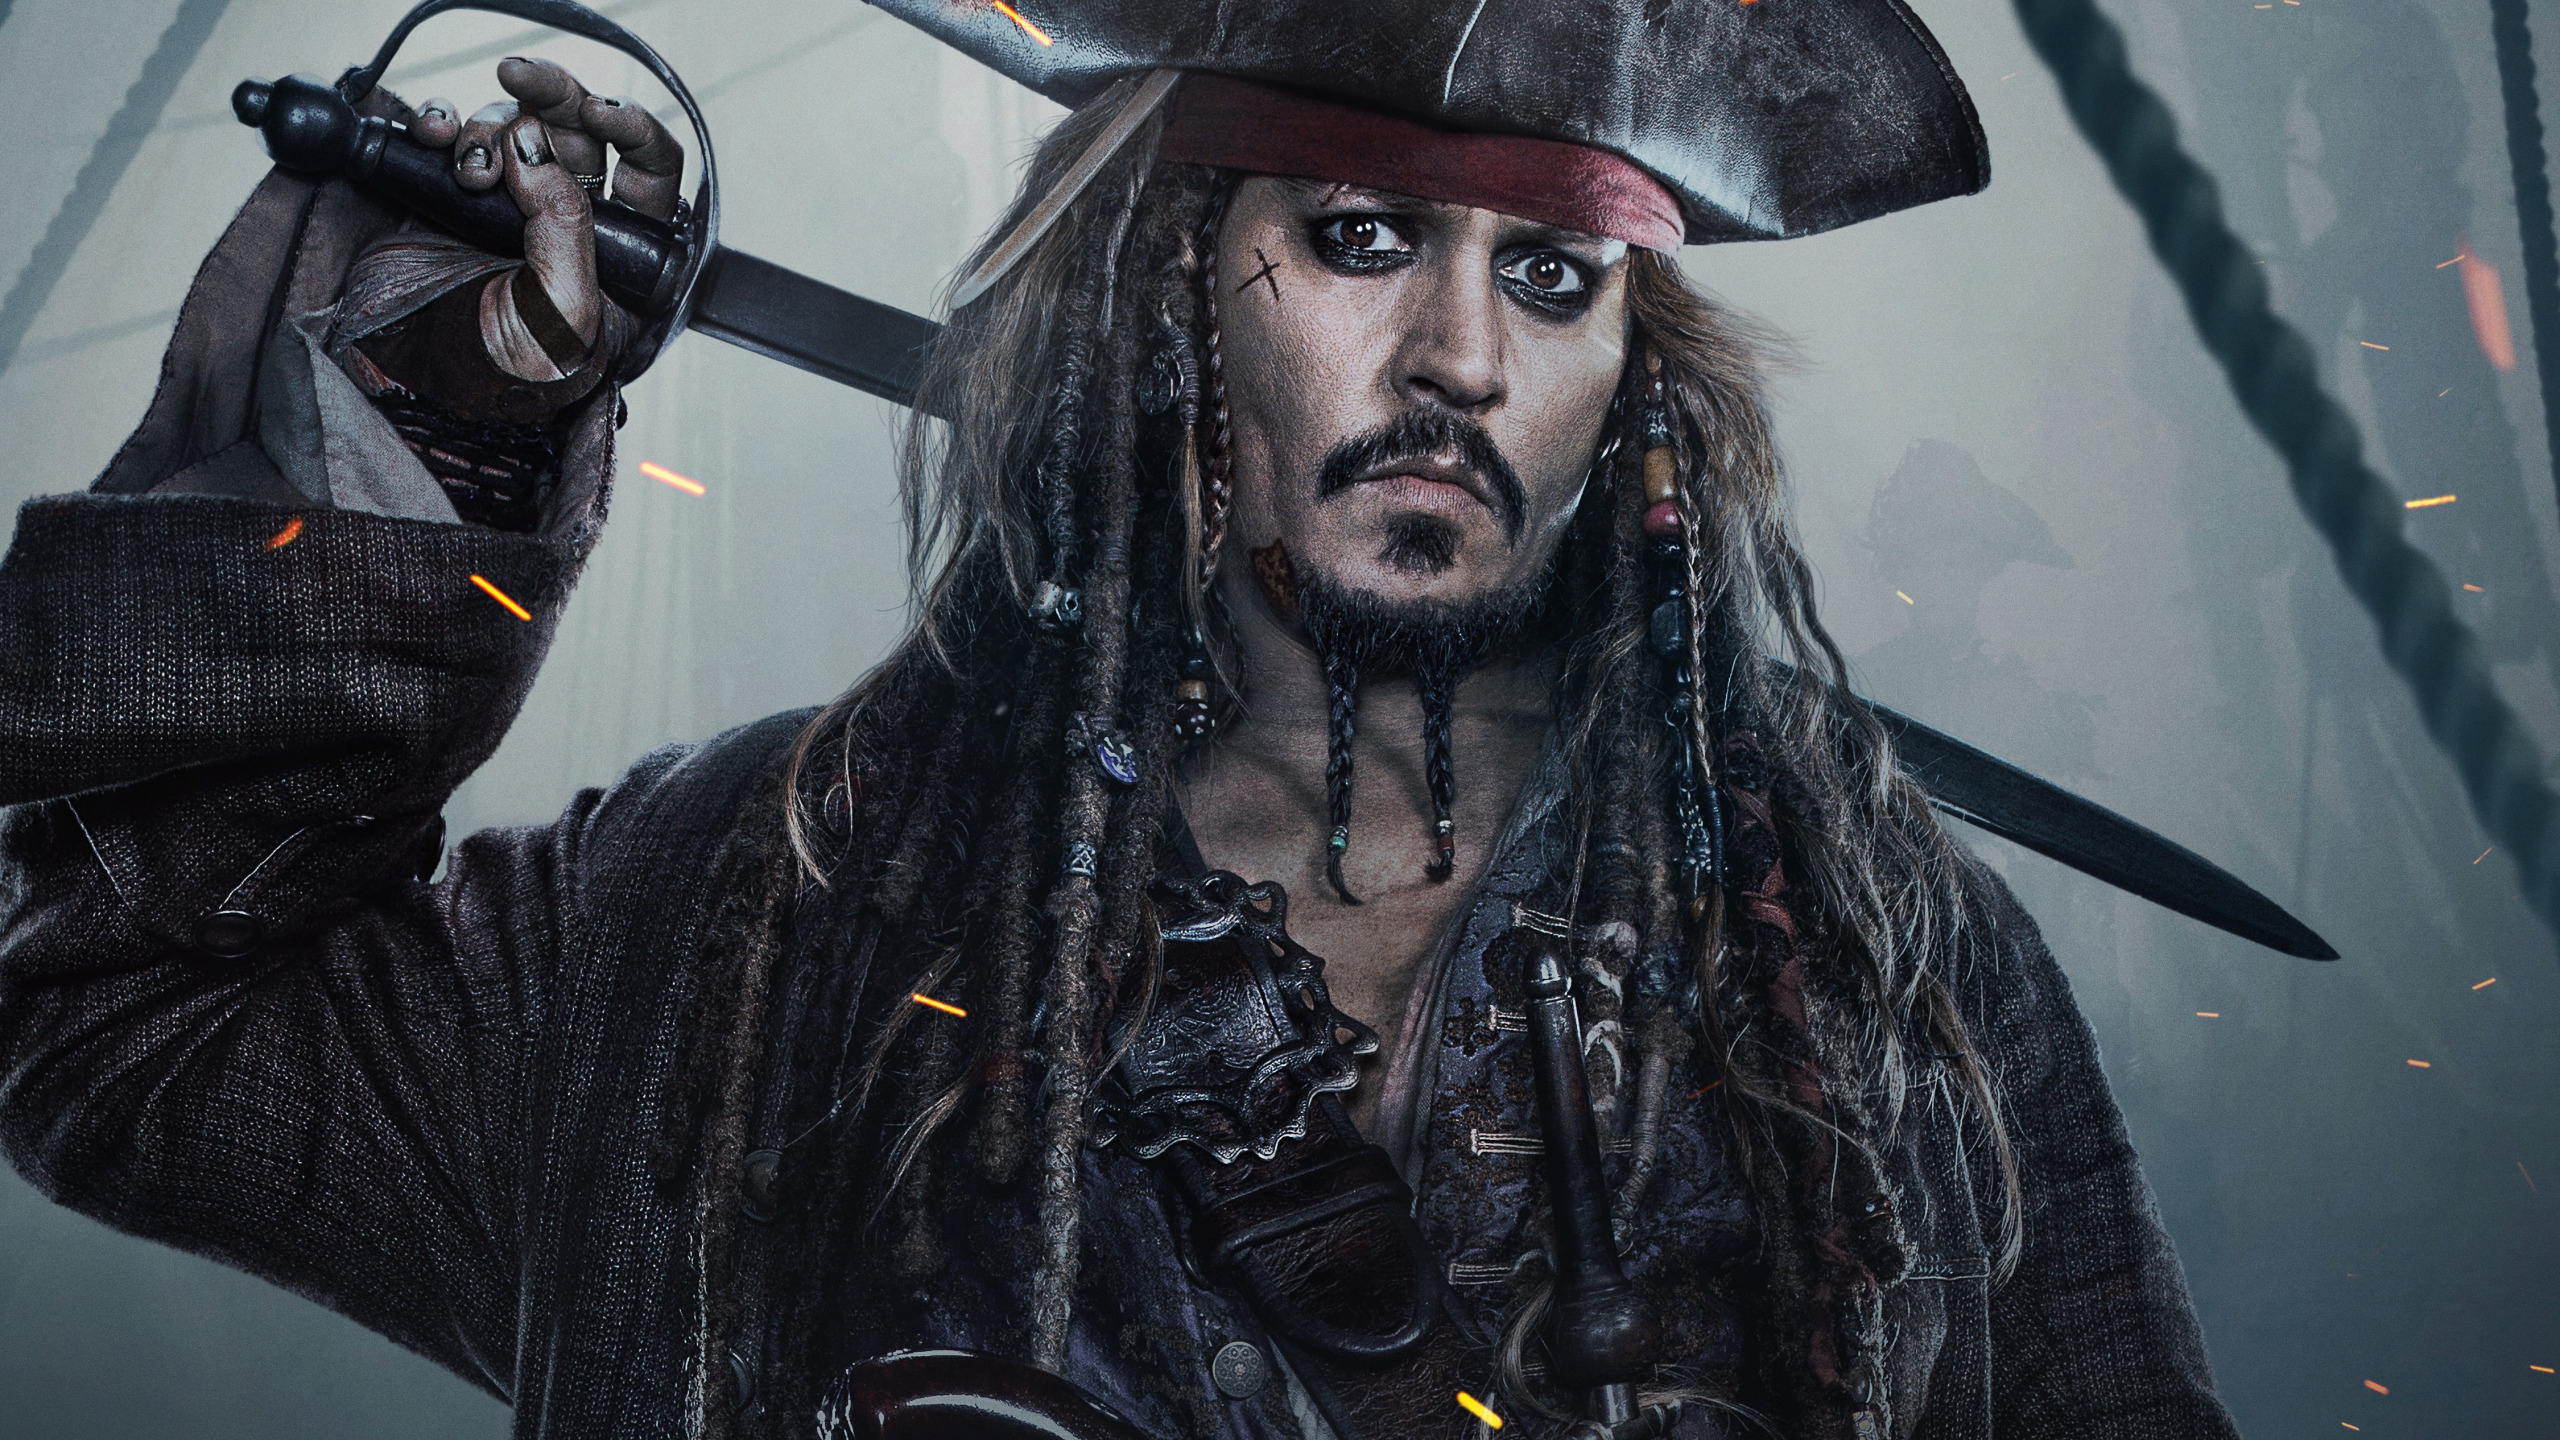 Johnny Depp: Achieved perhaps his greatest success as Capt. Jack Sparrow in the Pirates of the Caribbean series. 2560x1440 HD Background.